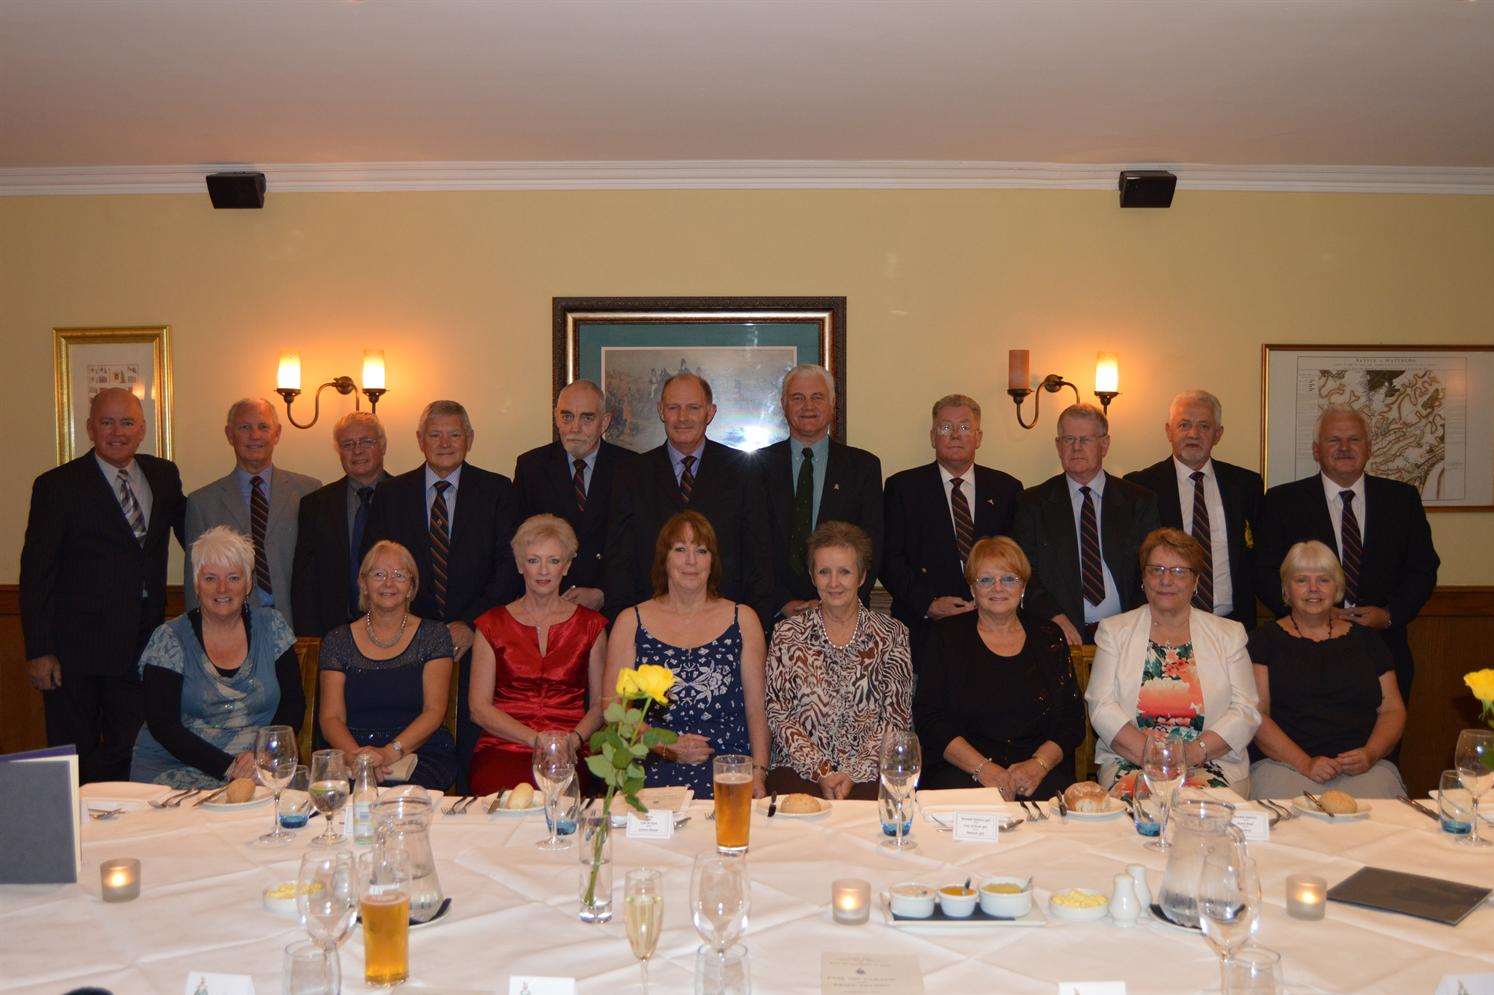 The 48th reunion of JE 31 Squad Royal Marines at the Royal Hotel